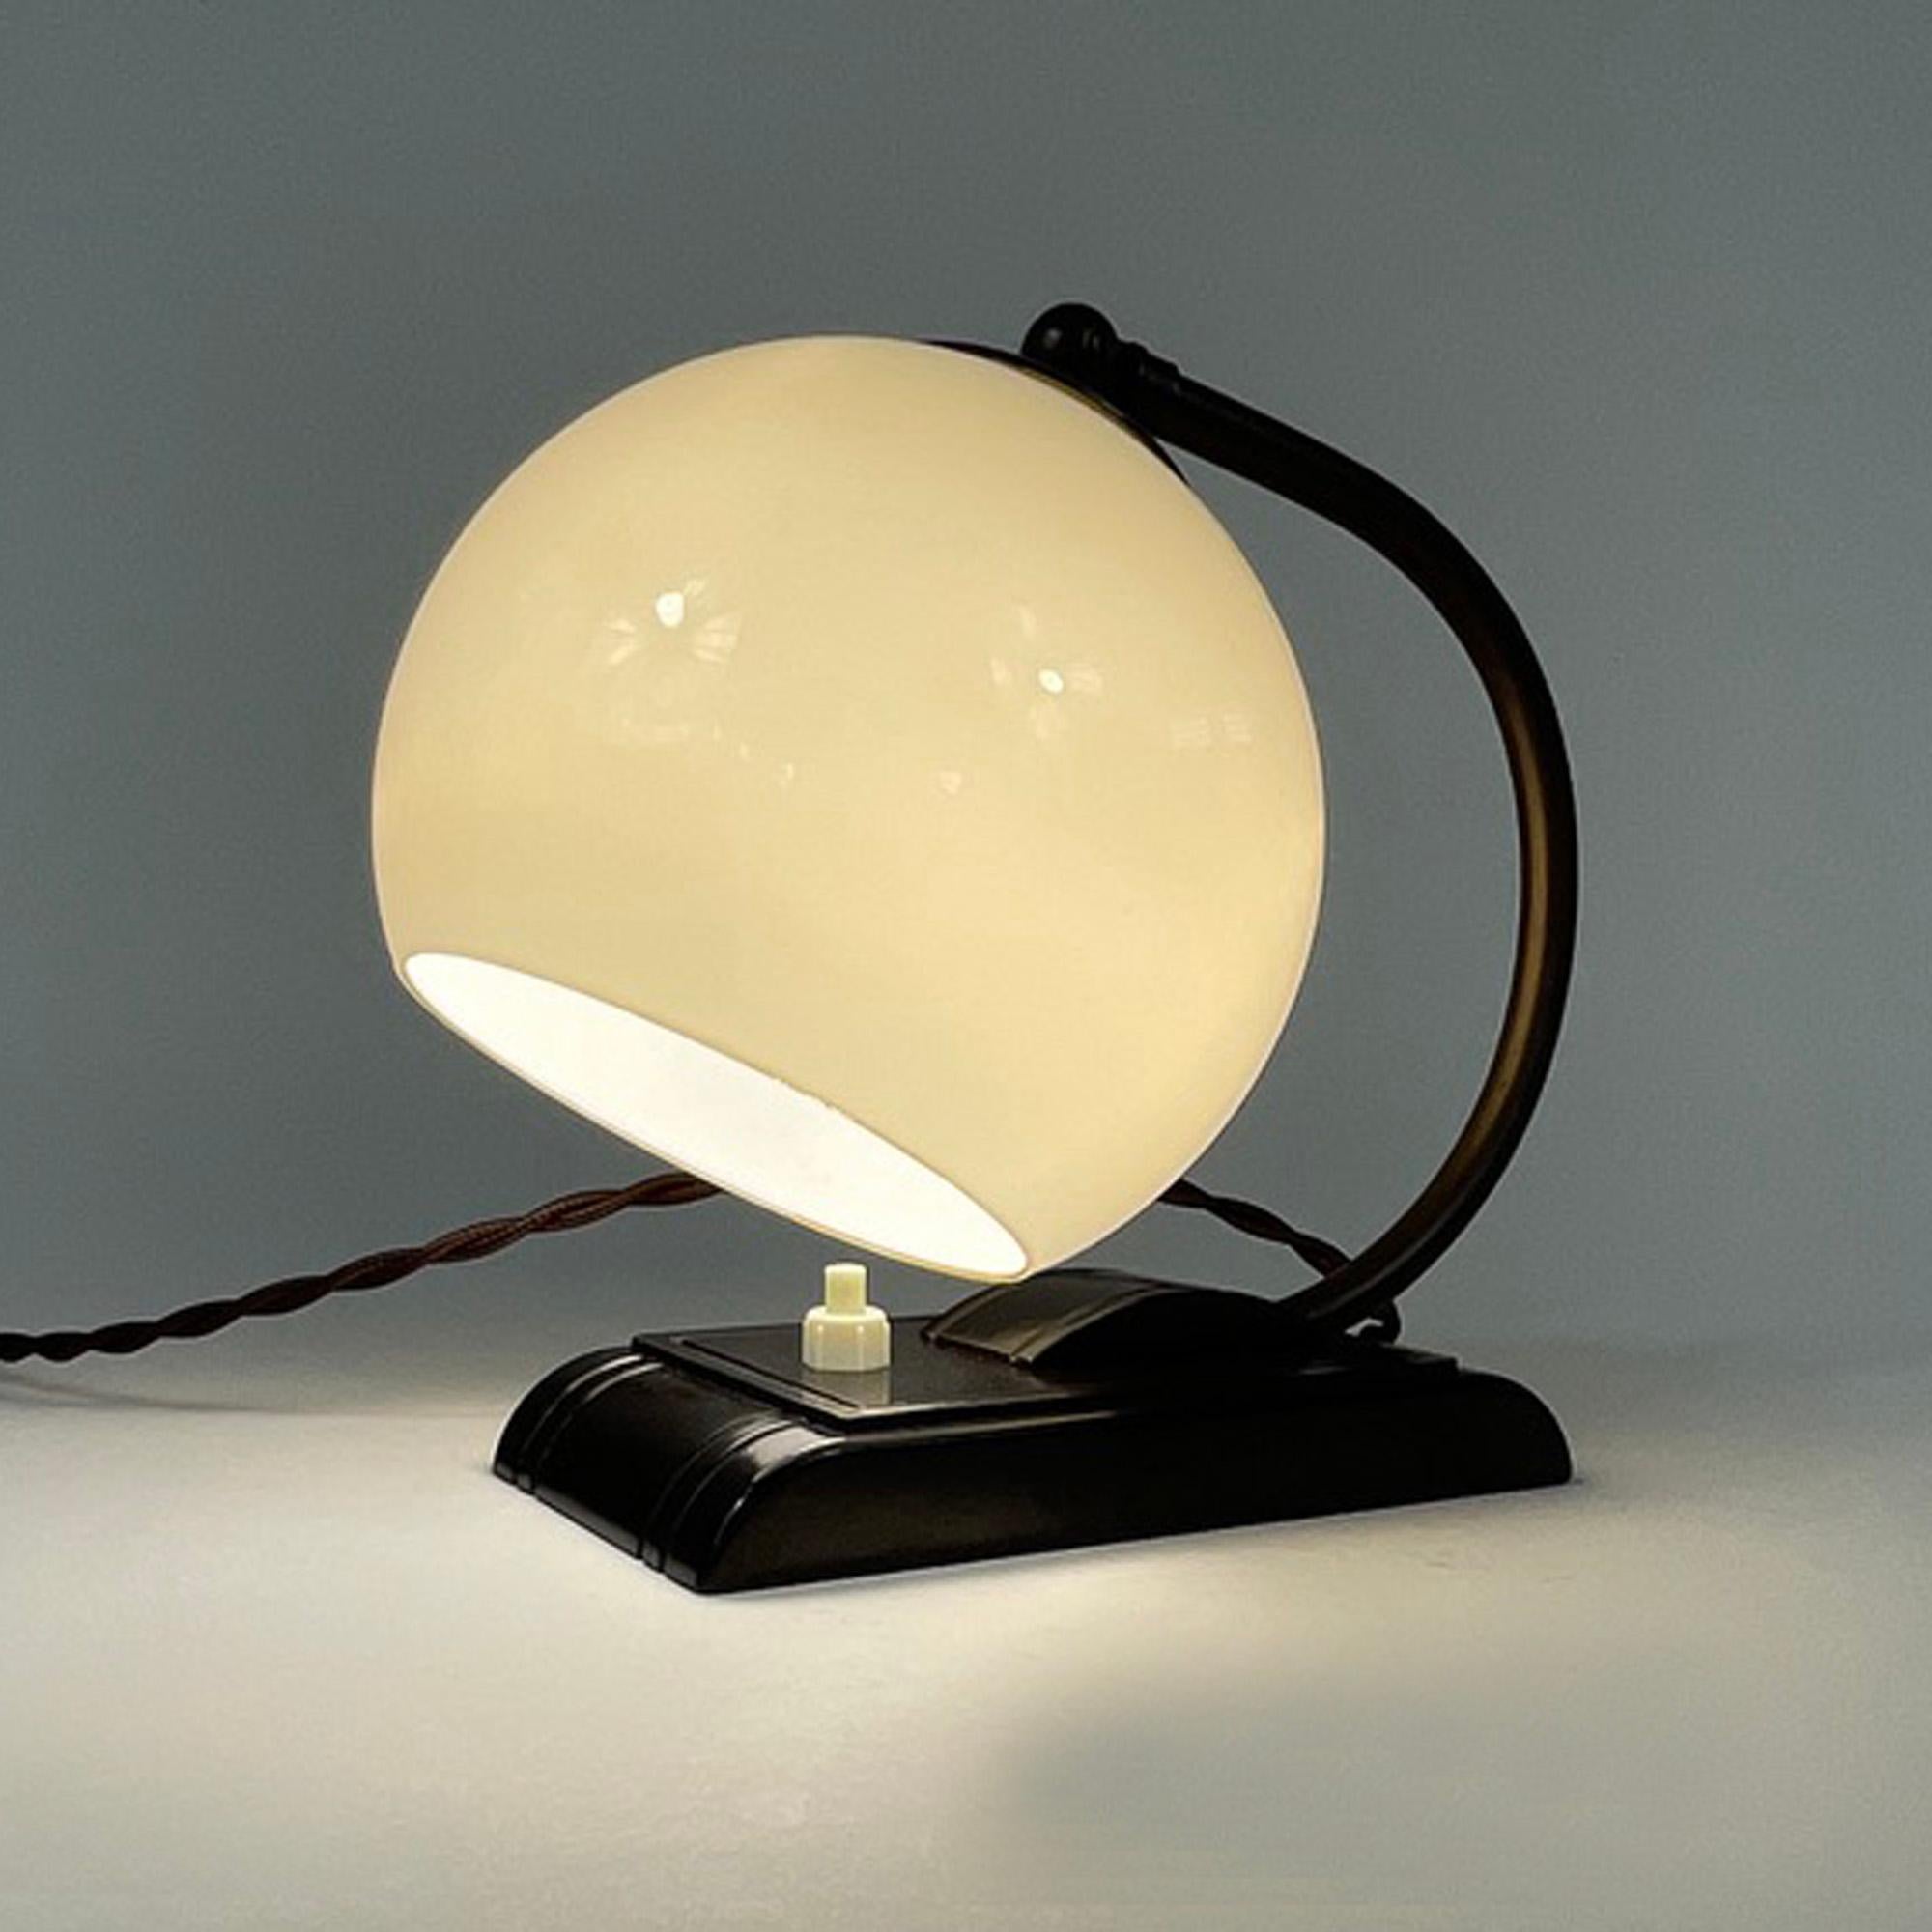 Mid-20th Century Art Deco Streamline Design Bakelite and Opaline Table Lamp, 1920s to 1930s For Sale